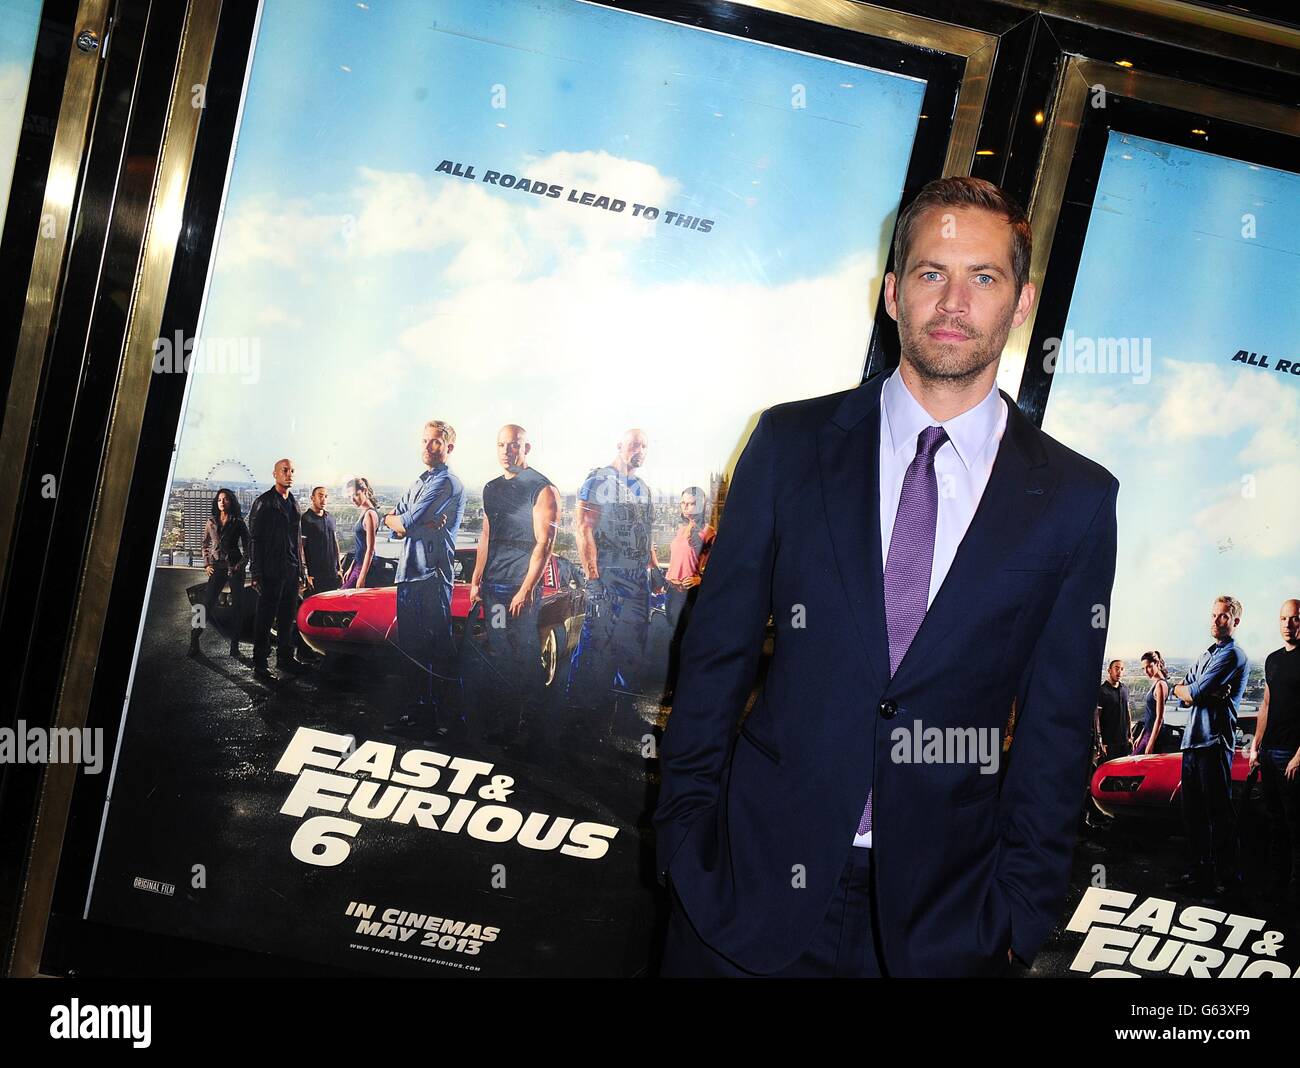 Fast and Furious 6 Premiere - London. Paul Walker arriving for the premiere of Fast and Furious 6 at the Empire Leicester Square, London. Stock Photo